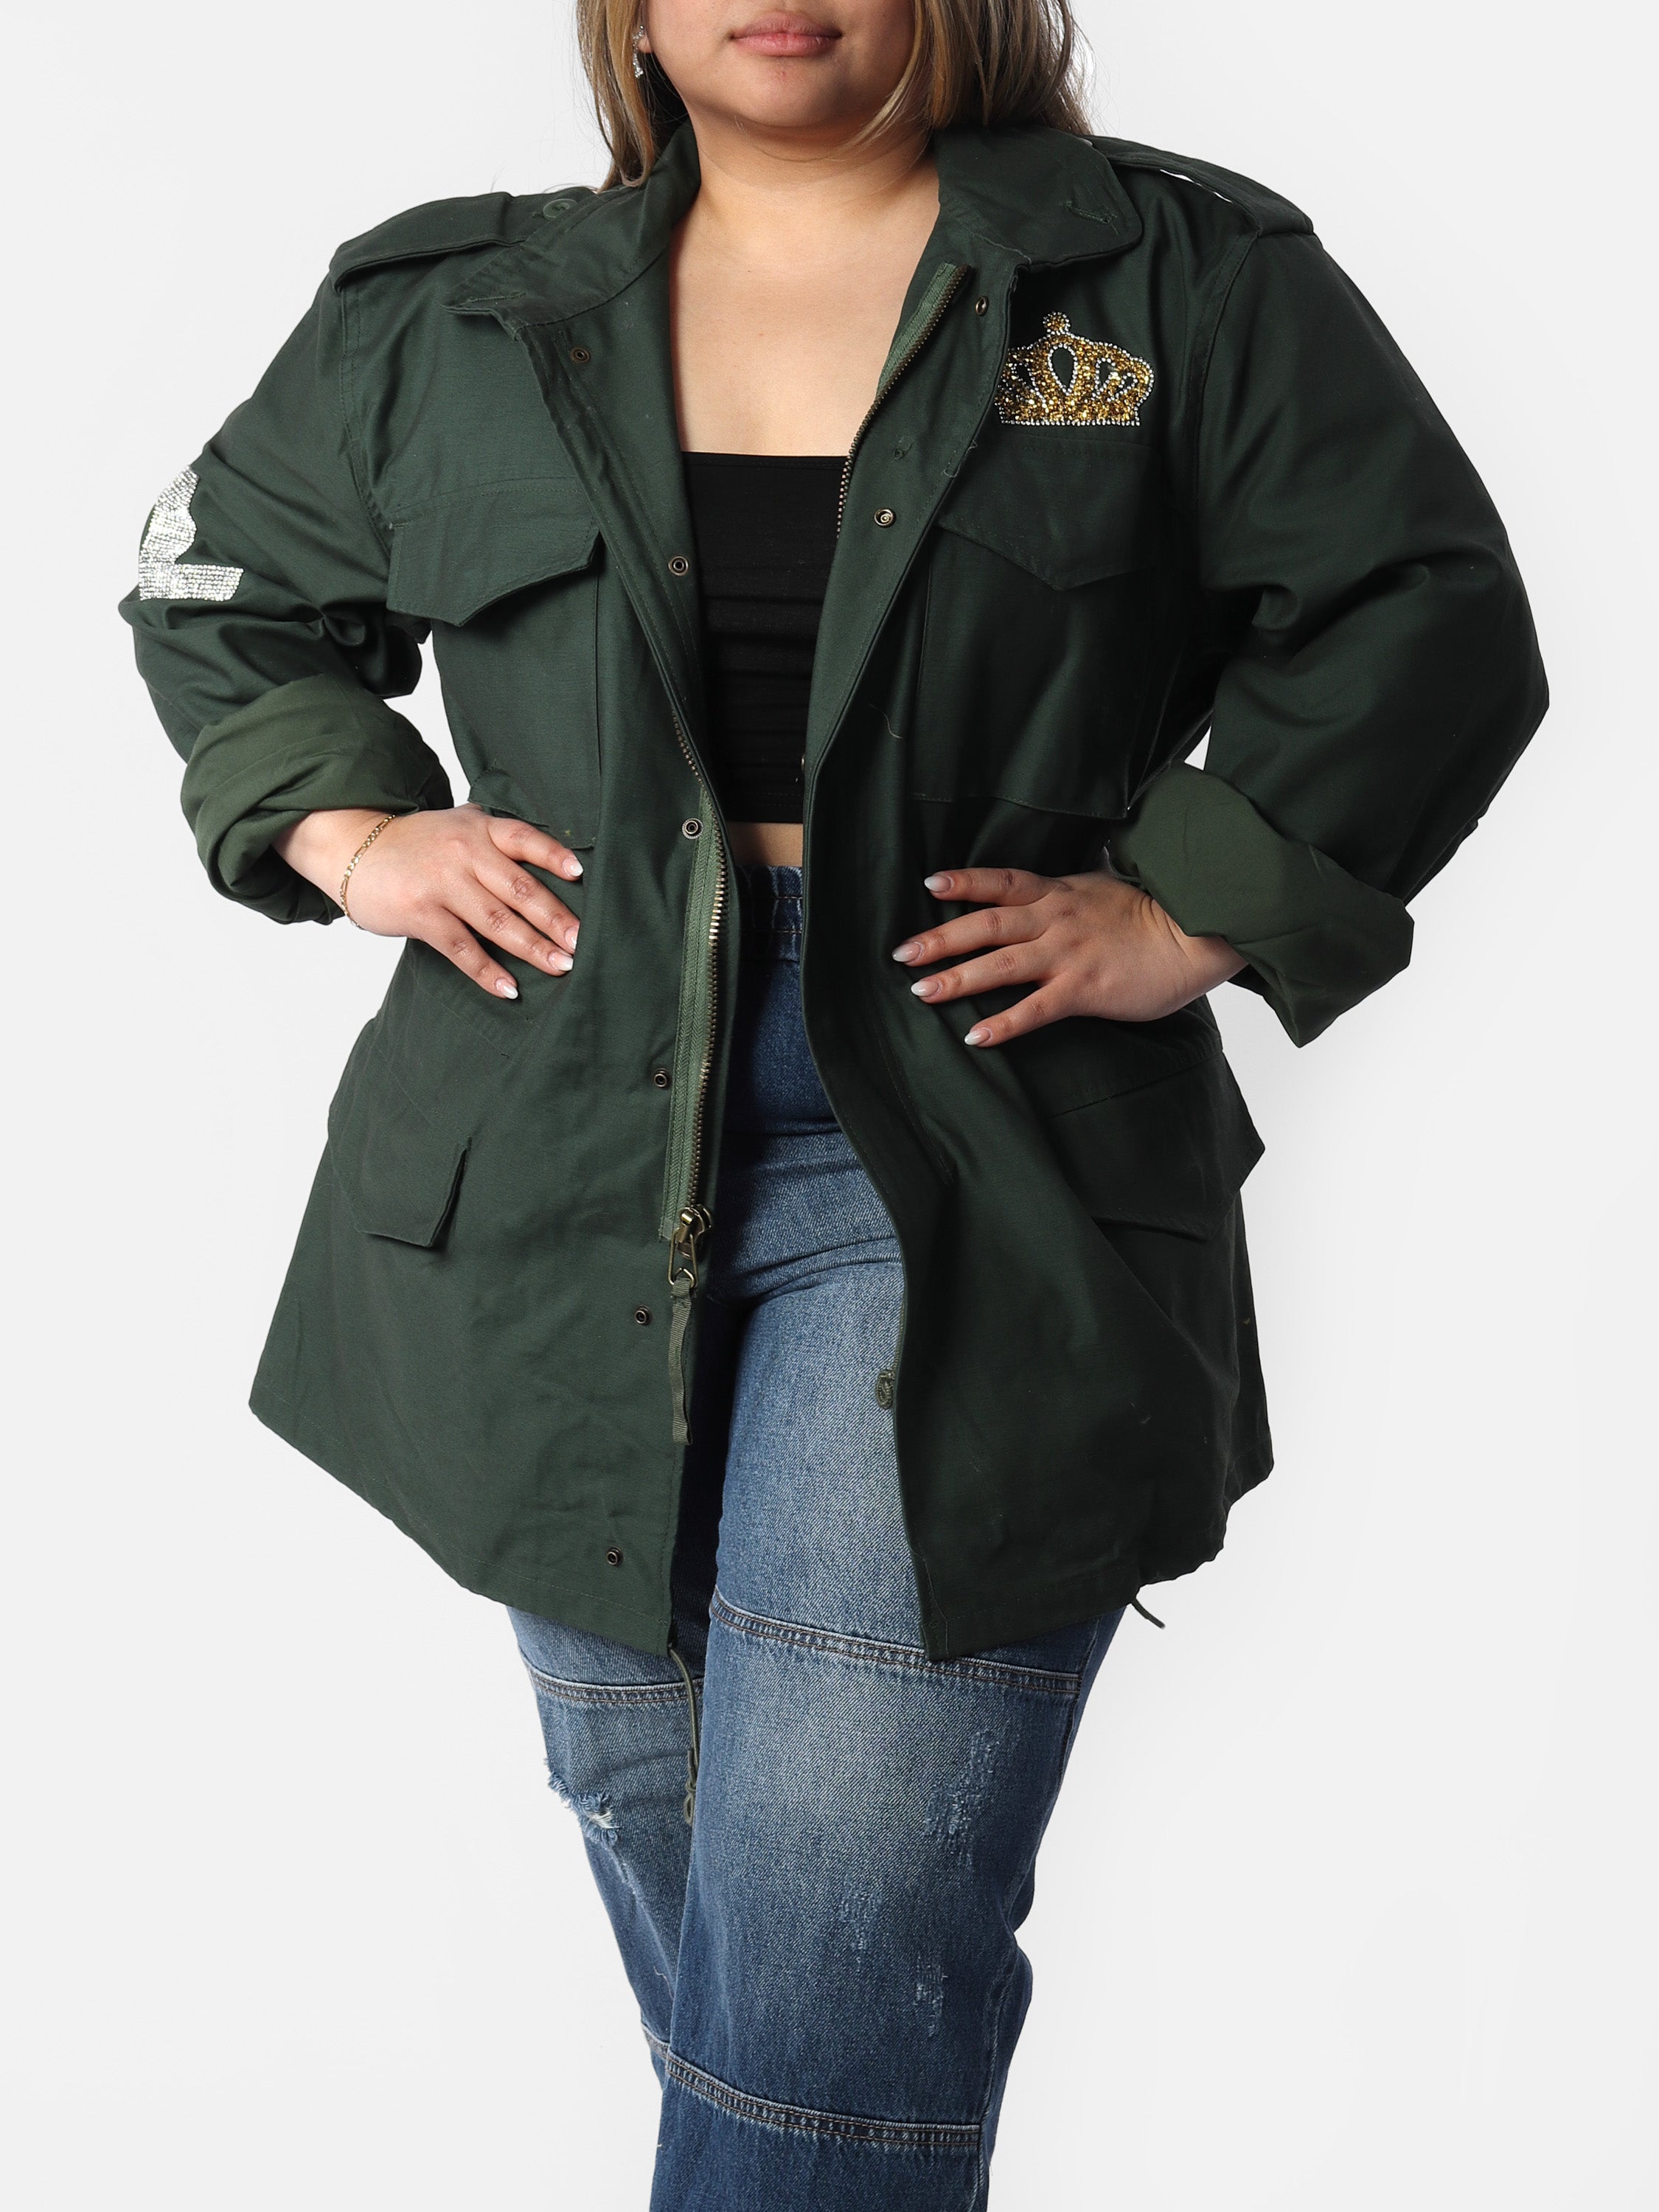 Stacey's Gold Military Jacket – of Eleven by Twins